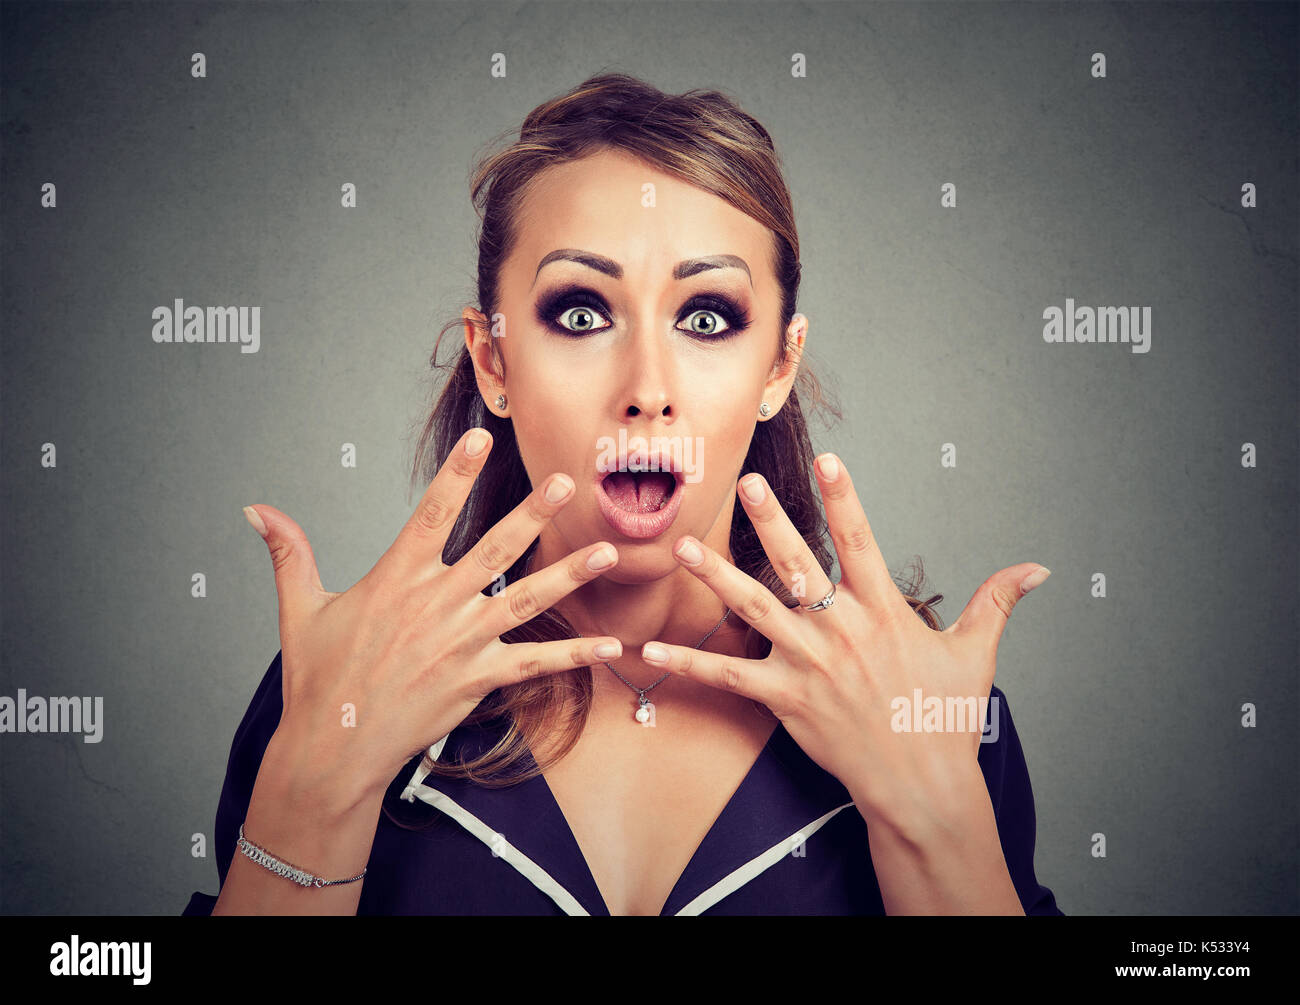 Amazed shocked woman looking at camera isolated on a gray background Stock Photo